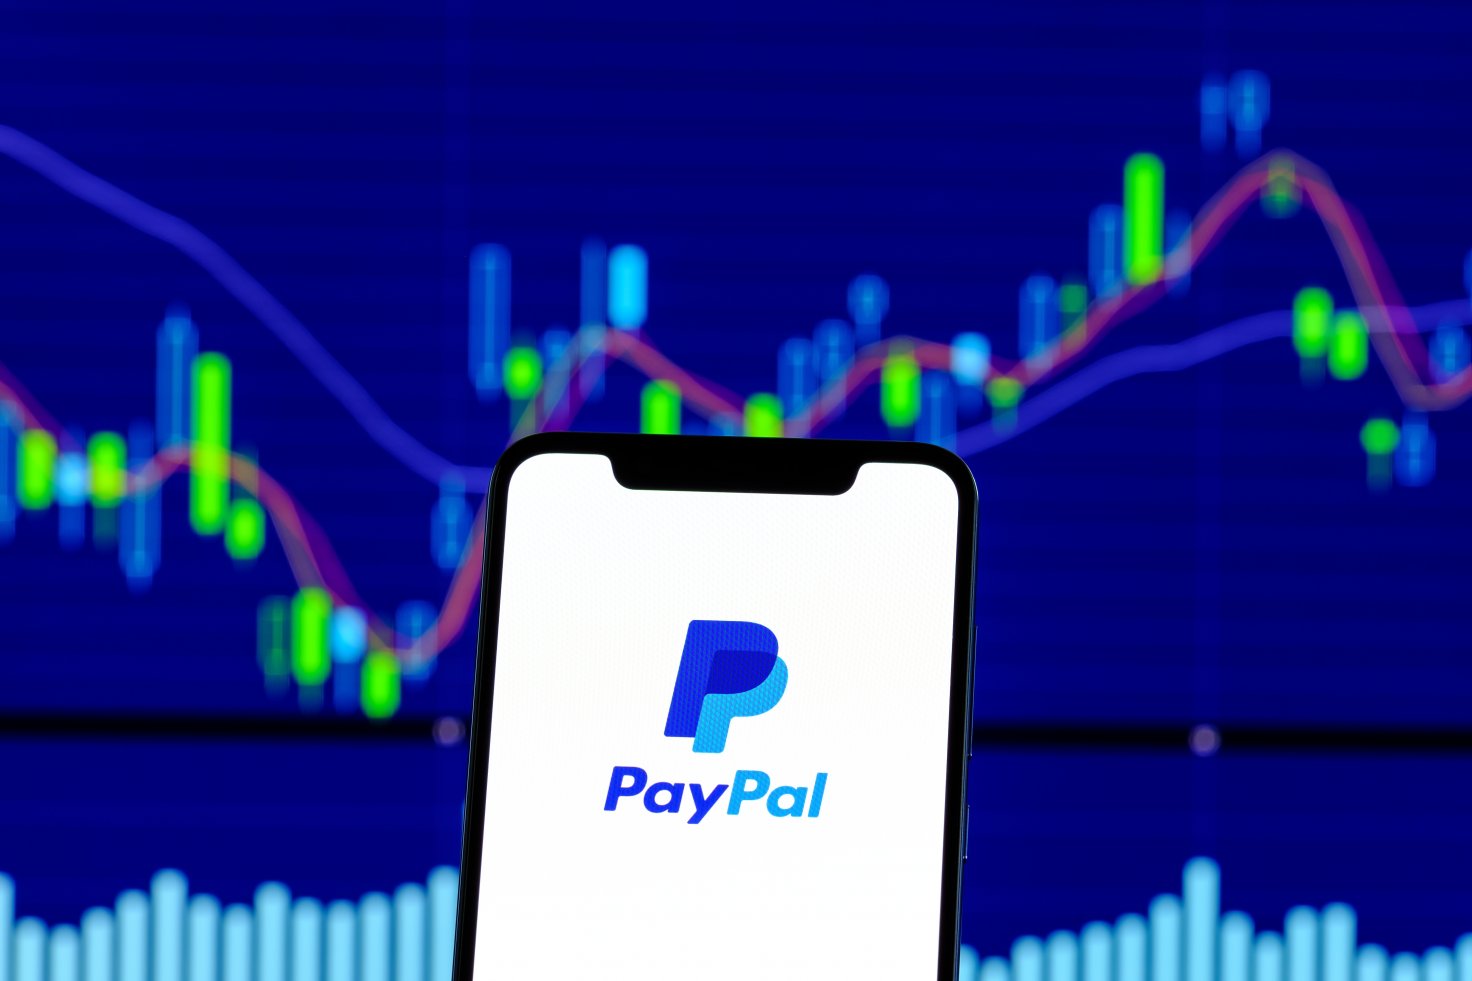 paypal stock forecast 2021